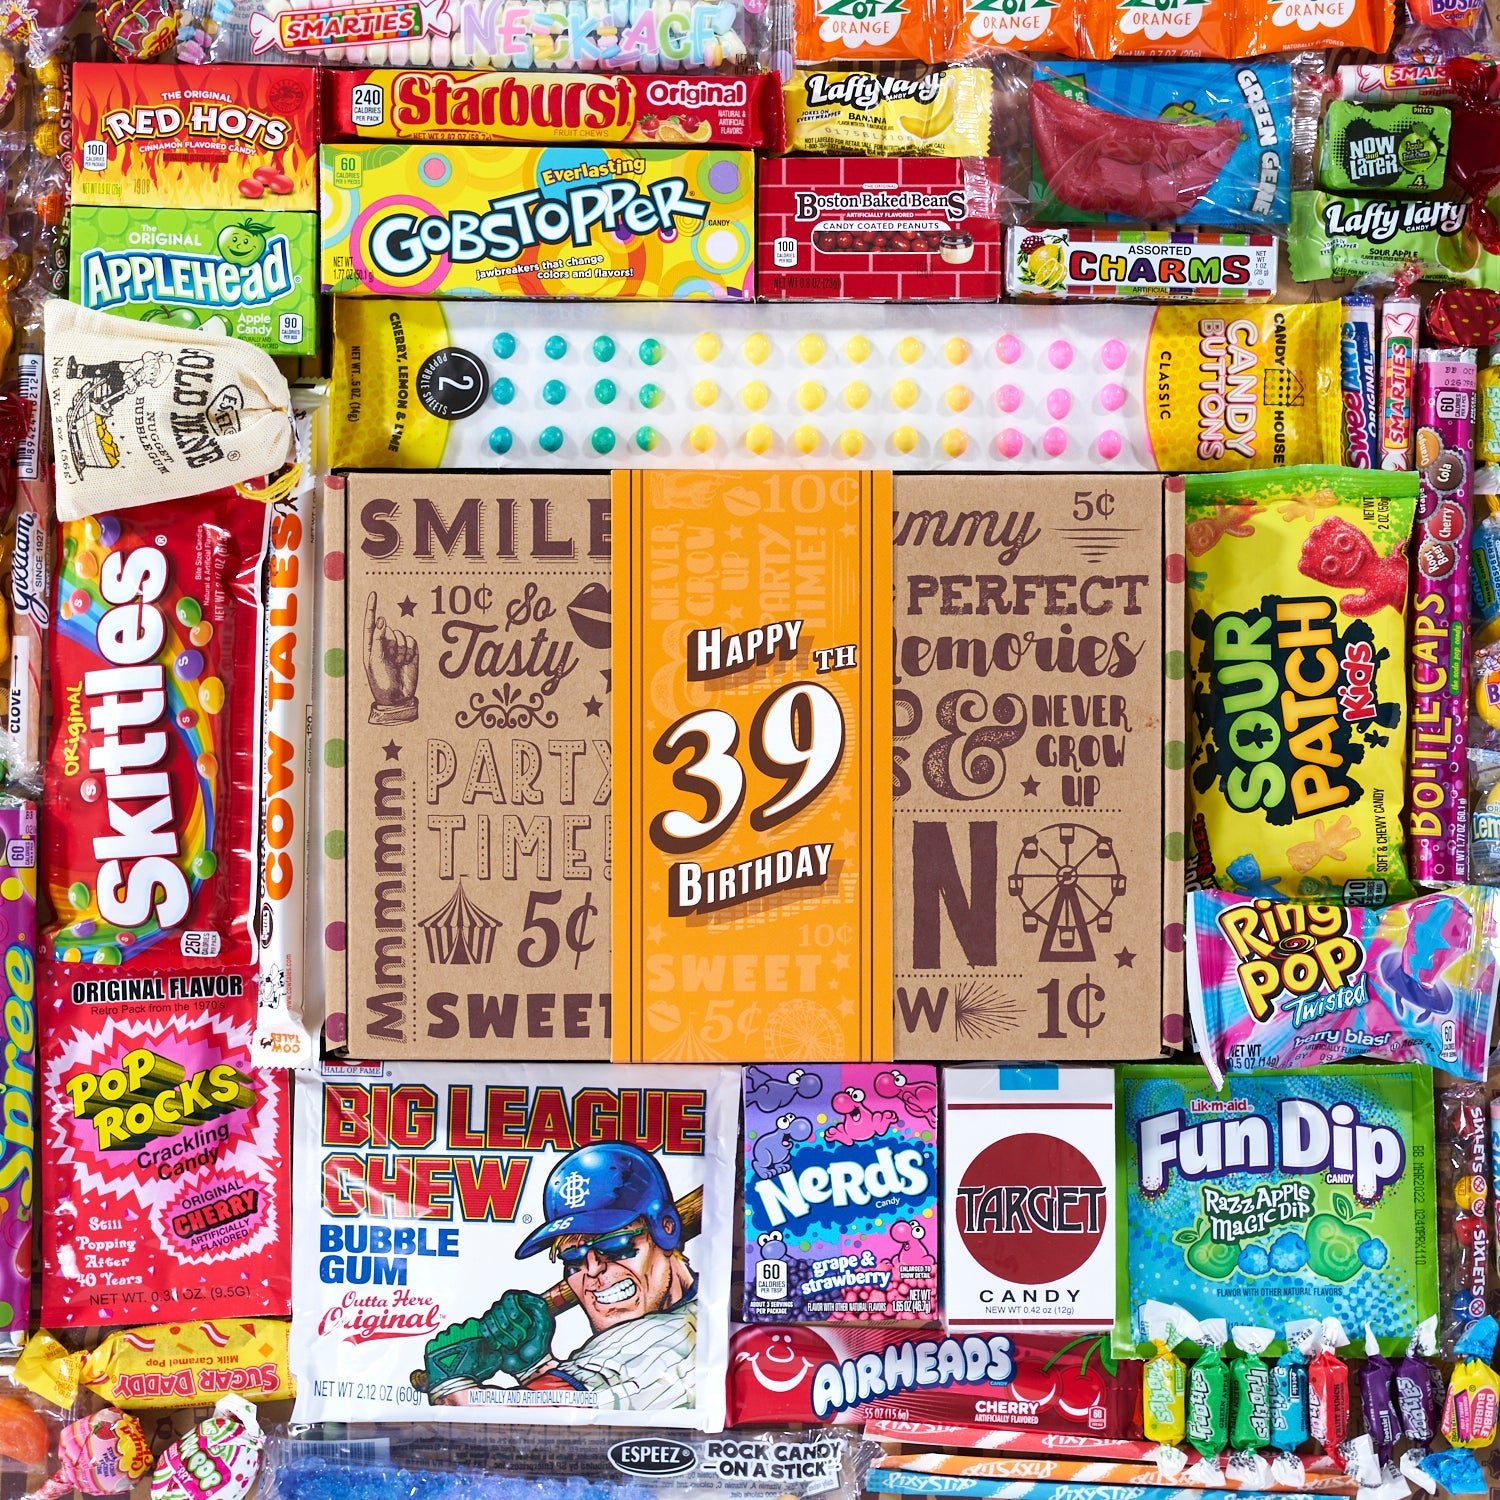 39th Birthday Retro Candy Gift - Vintage Candy Co.